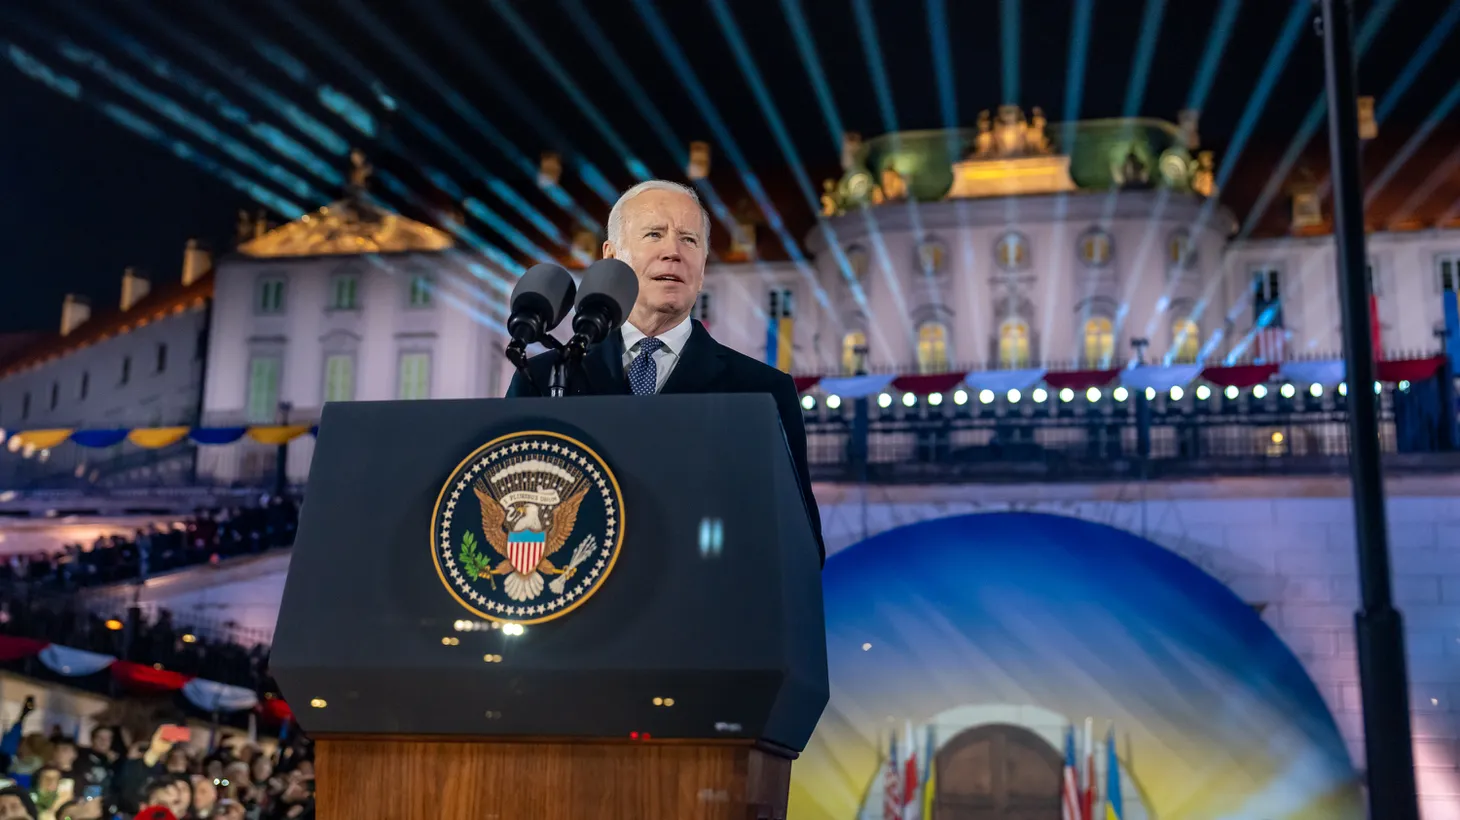 Joe Biden has announced his 2024 re-election bid in a new video early on April 25, 2023 morning.